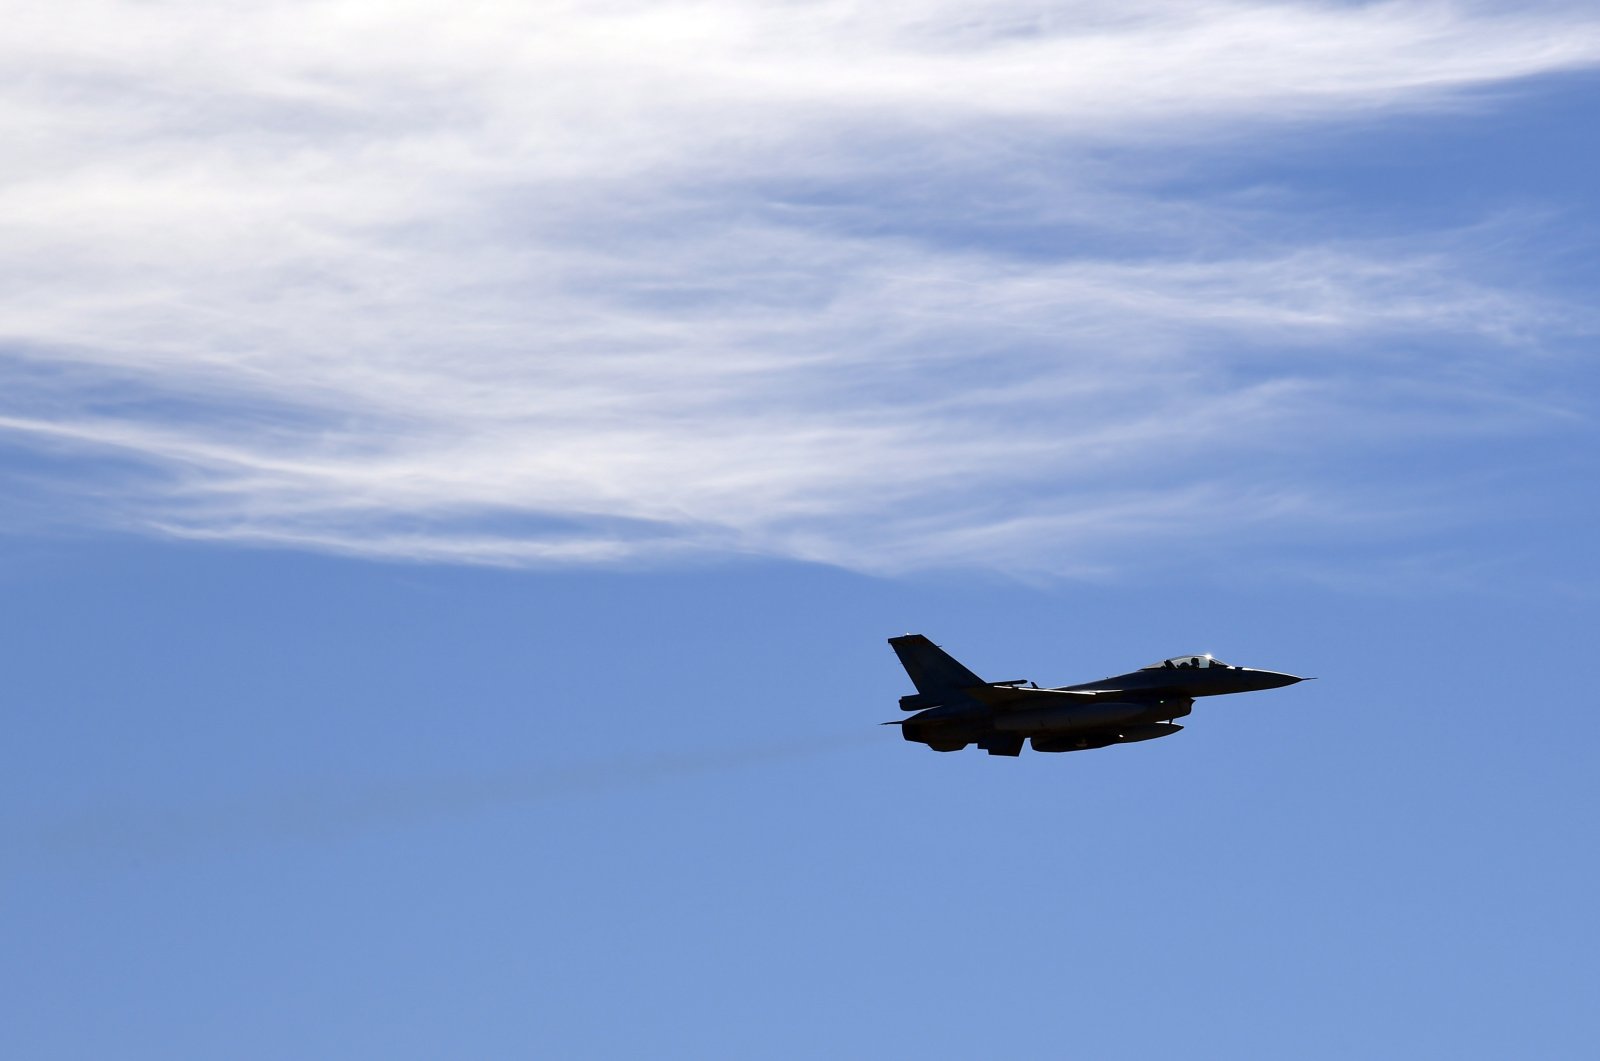 A Hellenic Airforce upgraded F-16 Viper, performs a flyover during a joint military drill, at Tanagra military airbase, about 82 kilometers (51miles) north of Athens, Greece, Thursday, Feb. 4, 2021. (AP File Photo)